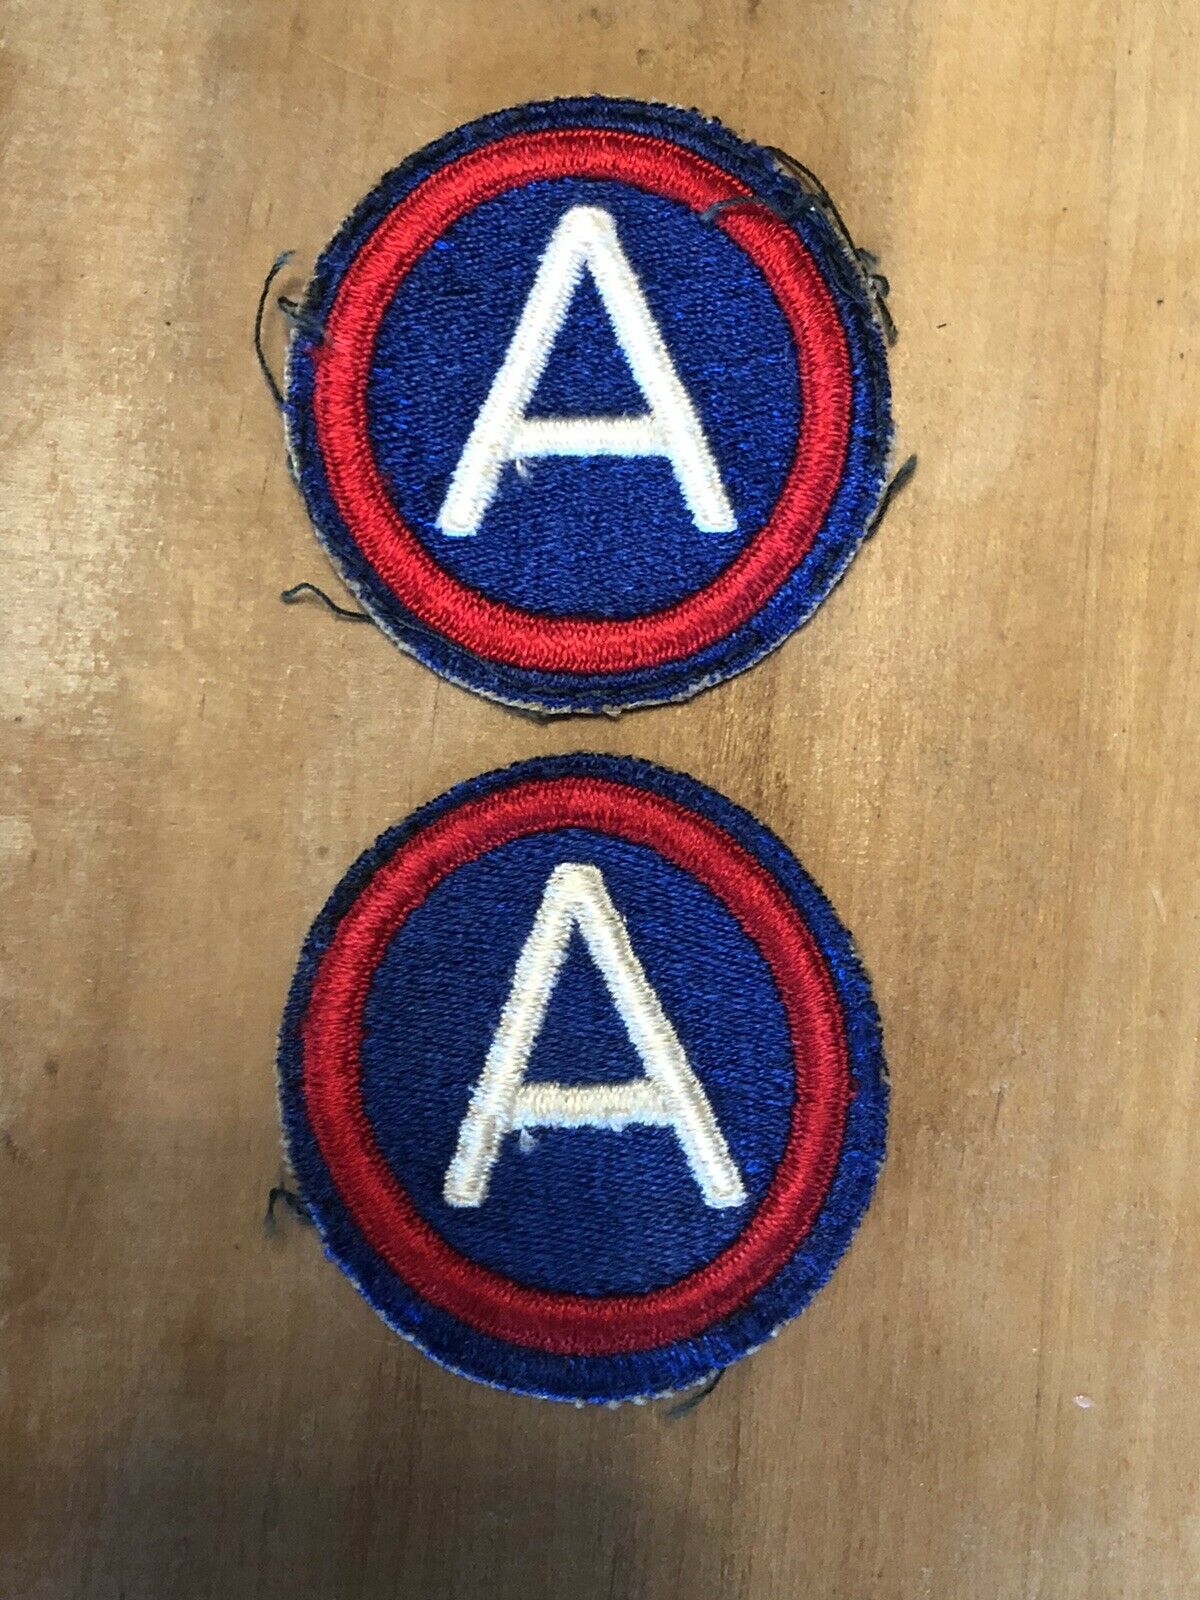 WW2 US army 3rd Military Patches Lot of 2 Red Blue White A Embroidery Cloth